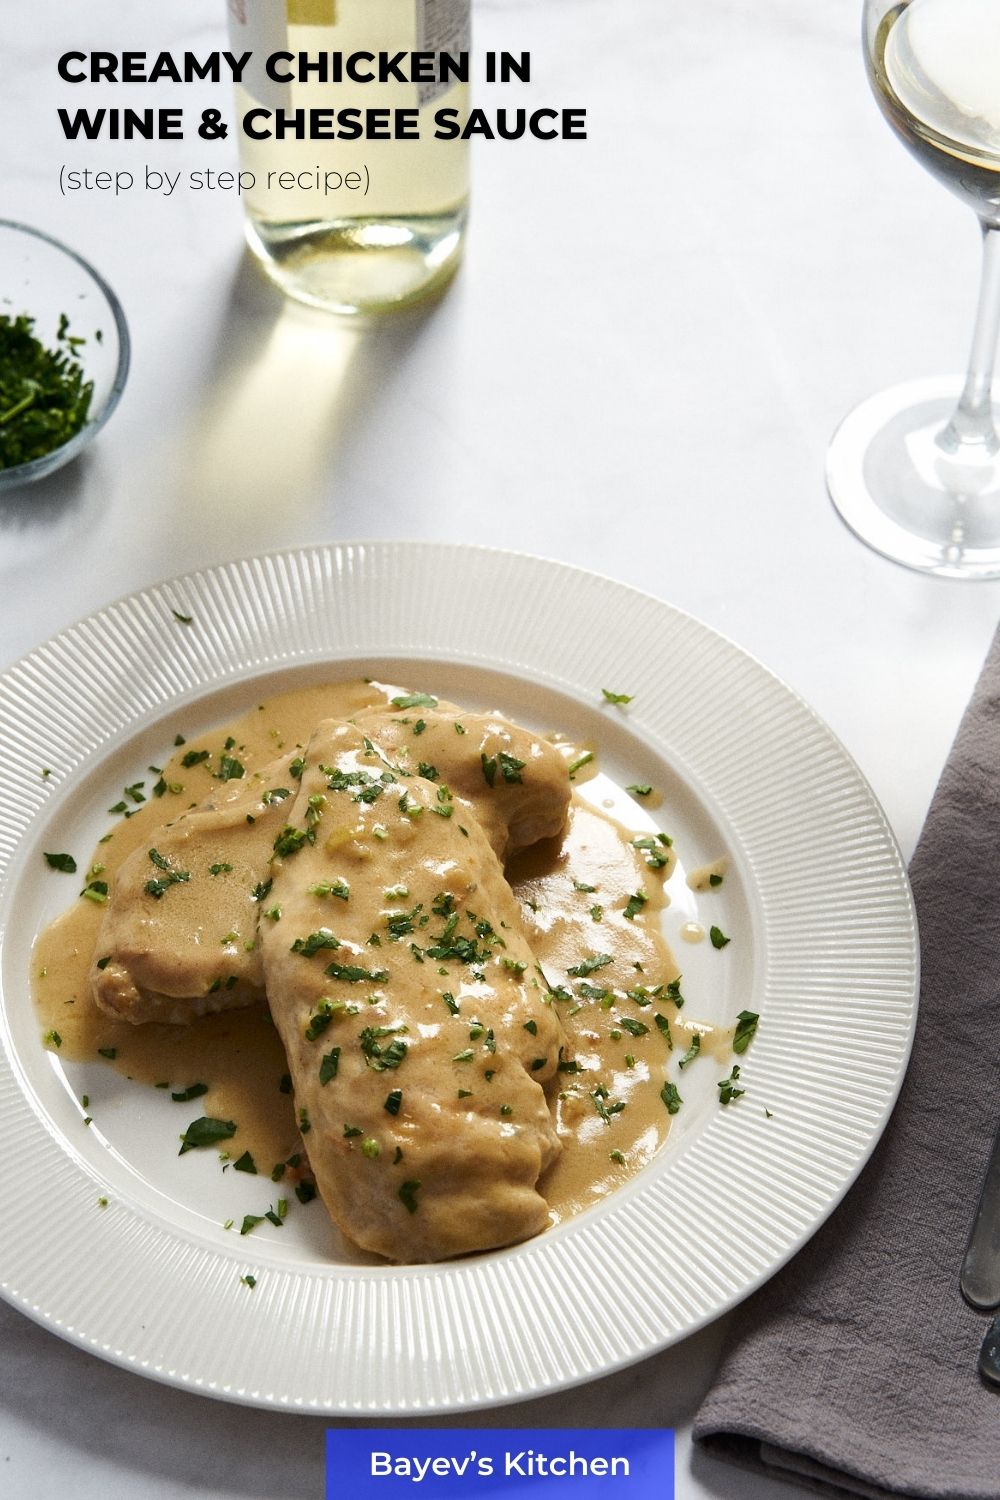 Chicken breasts in creamy wine and cheese sauce: easy step by step recipe with photos from BayevsKitchen